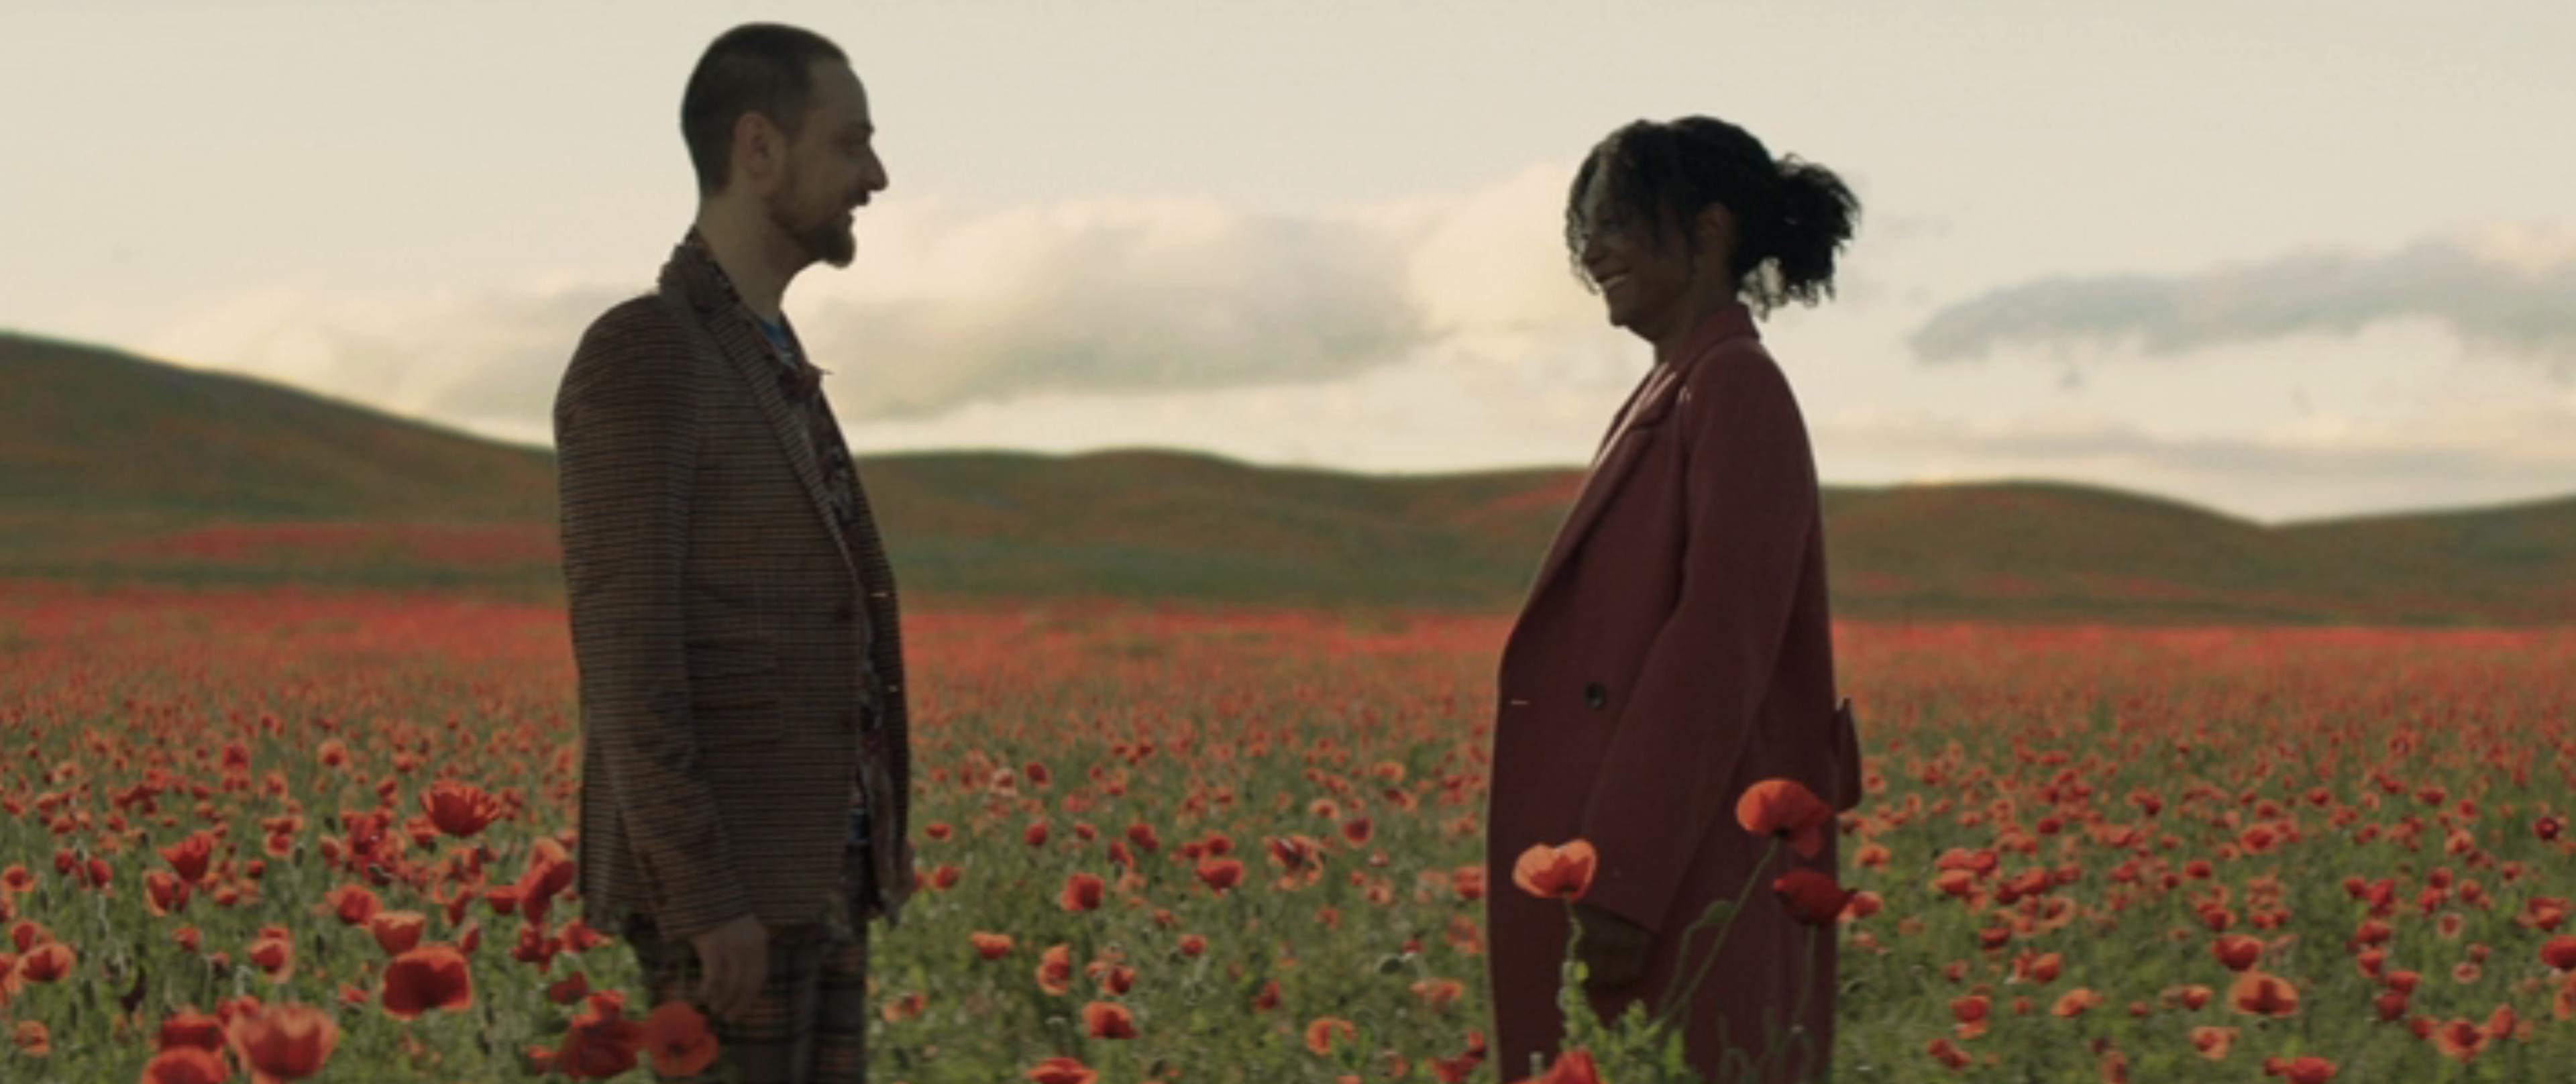 A man and woman face each other in a field of red poppies